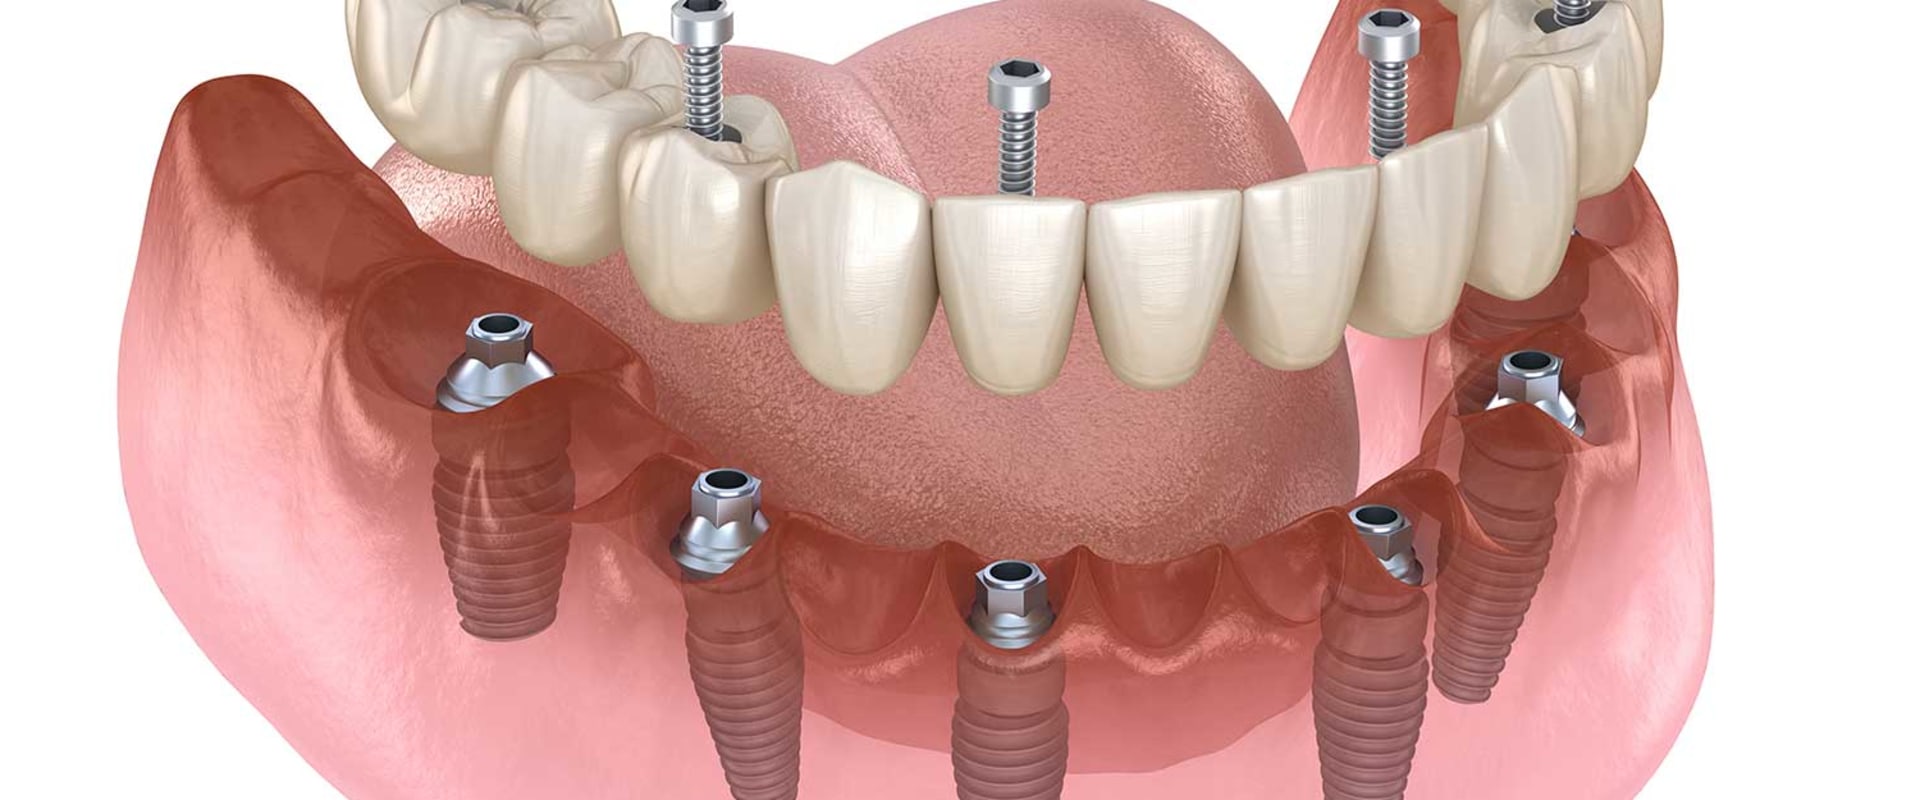 Making The Right Choice: How To Find The Best Dentist For All-On-Four Dentures In Monroe